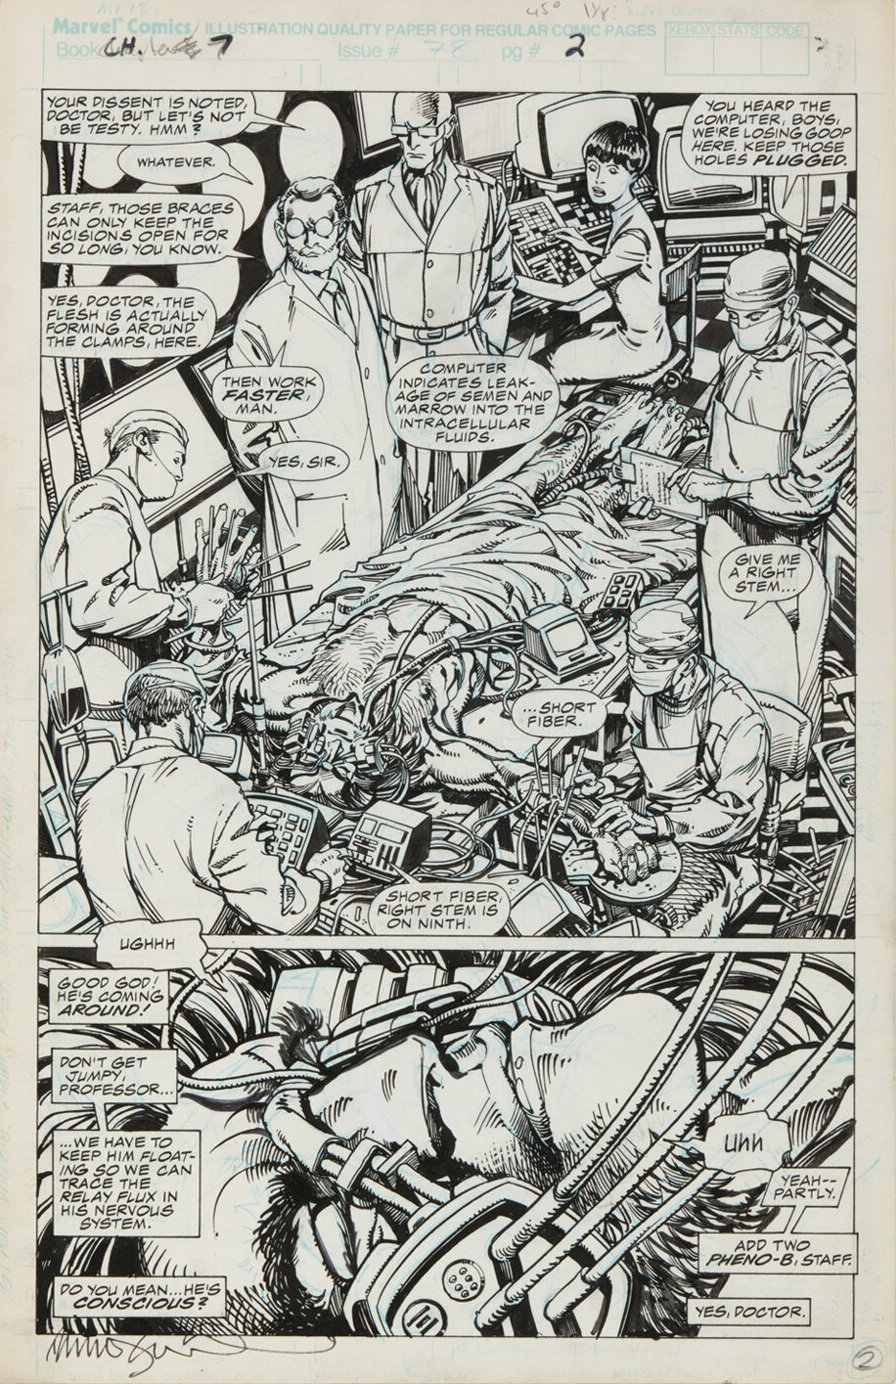 Marvel Comics Presents issue 78 page 2 by Barry Windsor Smith